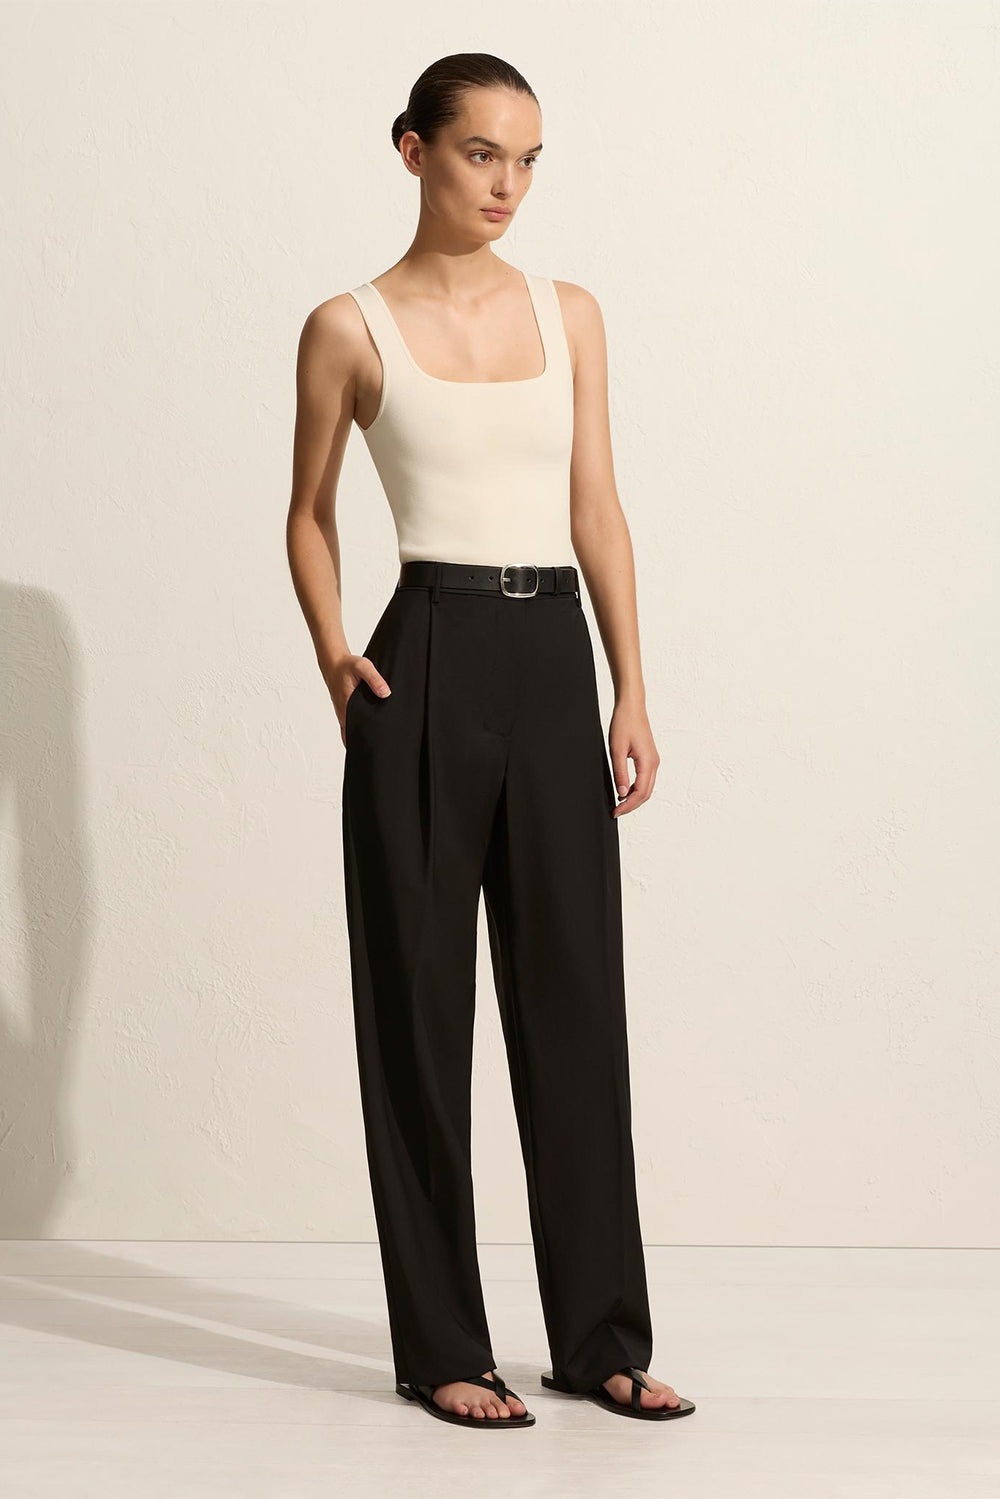 Womens Trouser | Matteau Relaxed pleat pant | The Standard Store